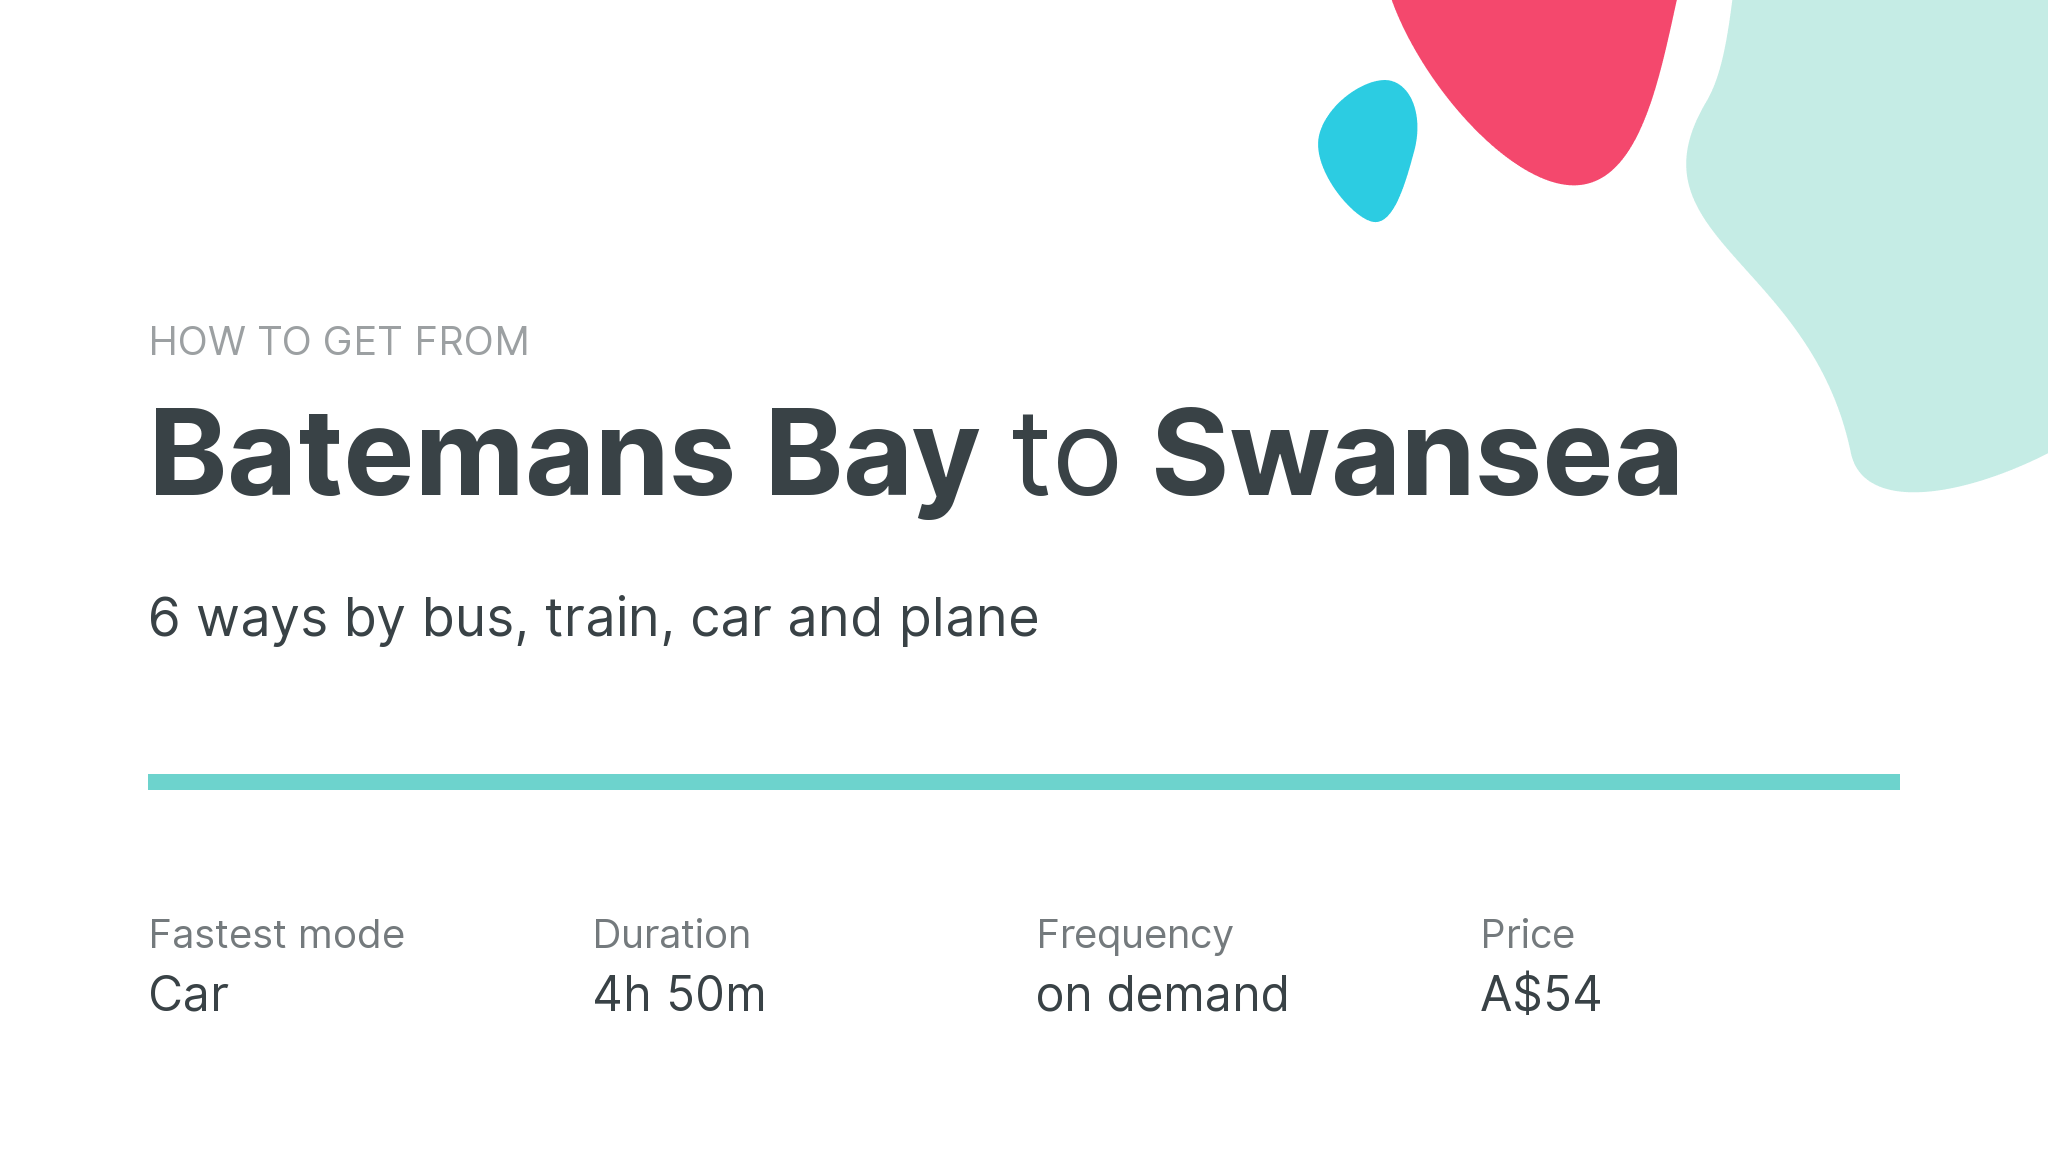 How do I get from Batemans Bay to Swansea